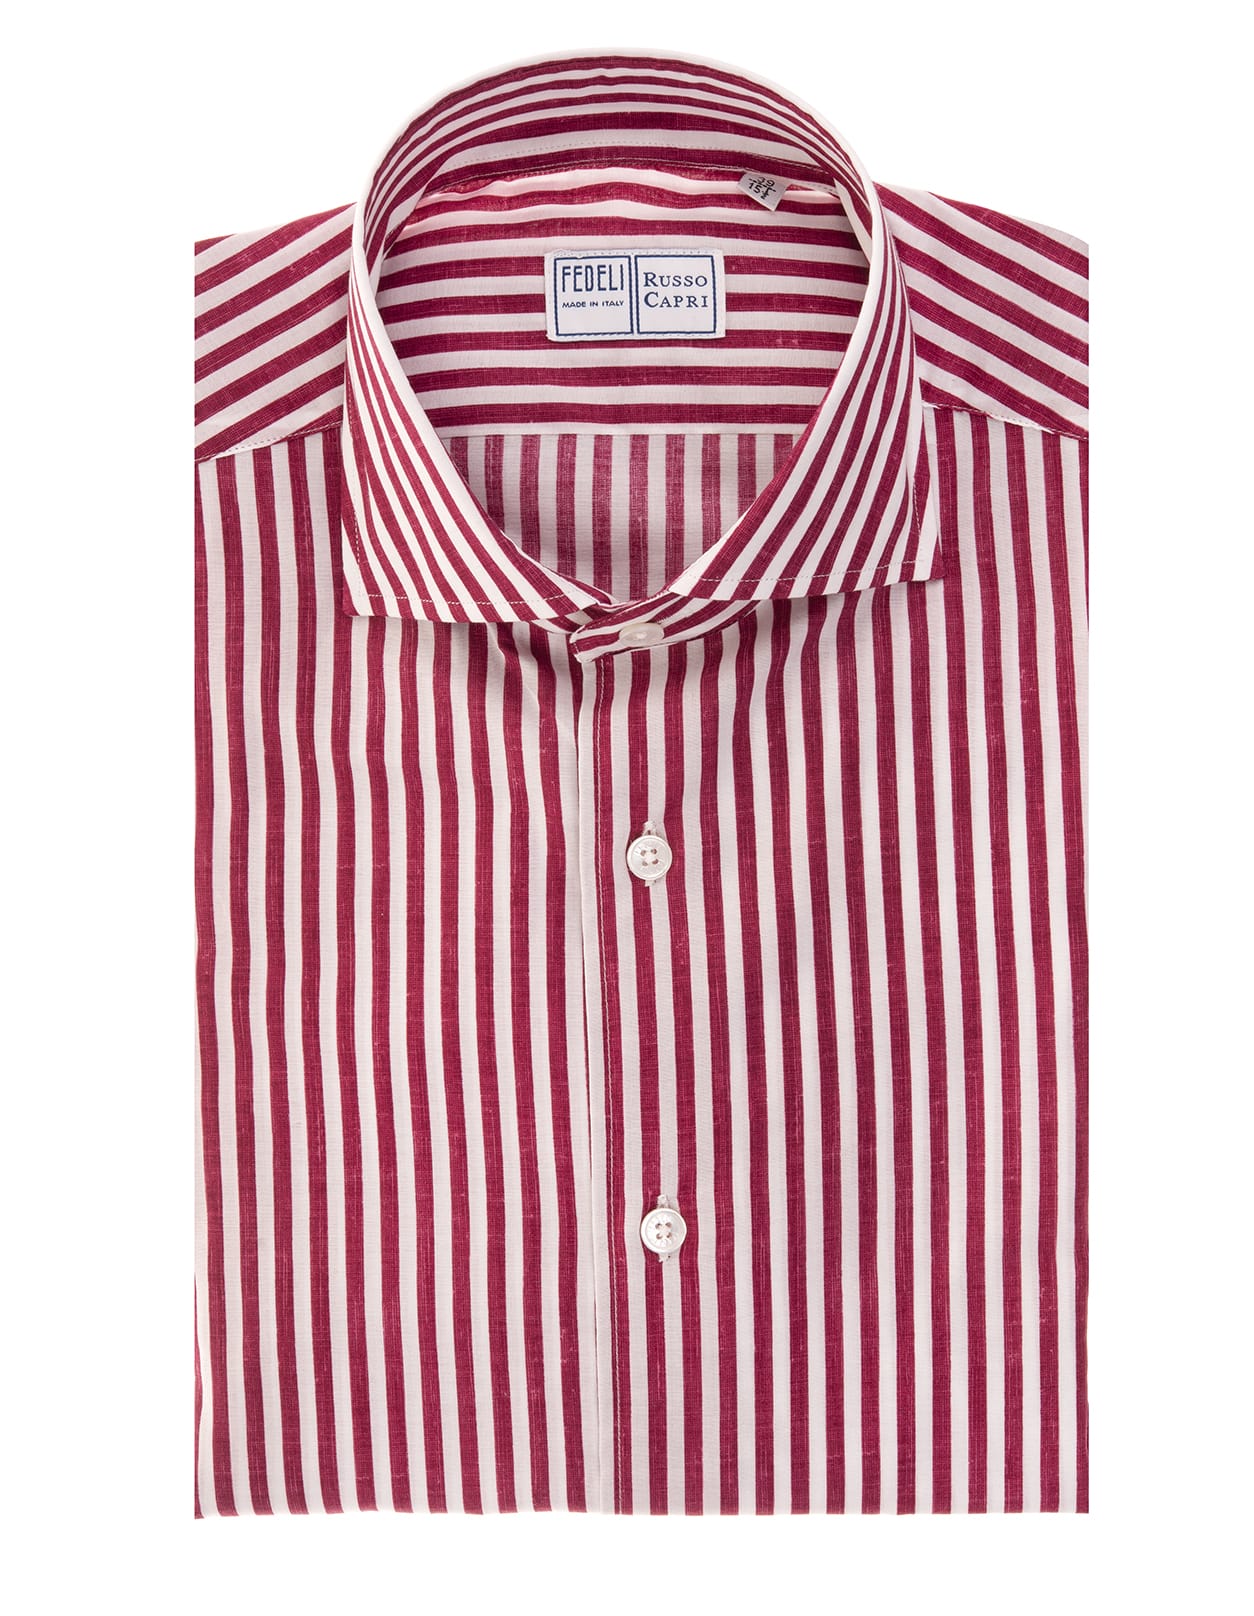 Fedeli White And Red Striped Cotton Shirt